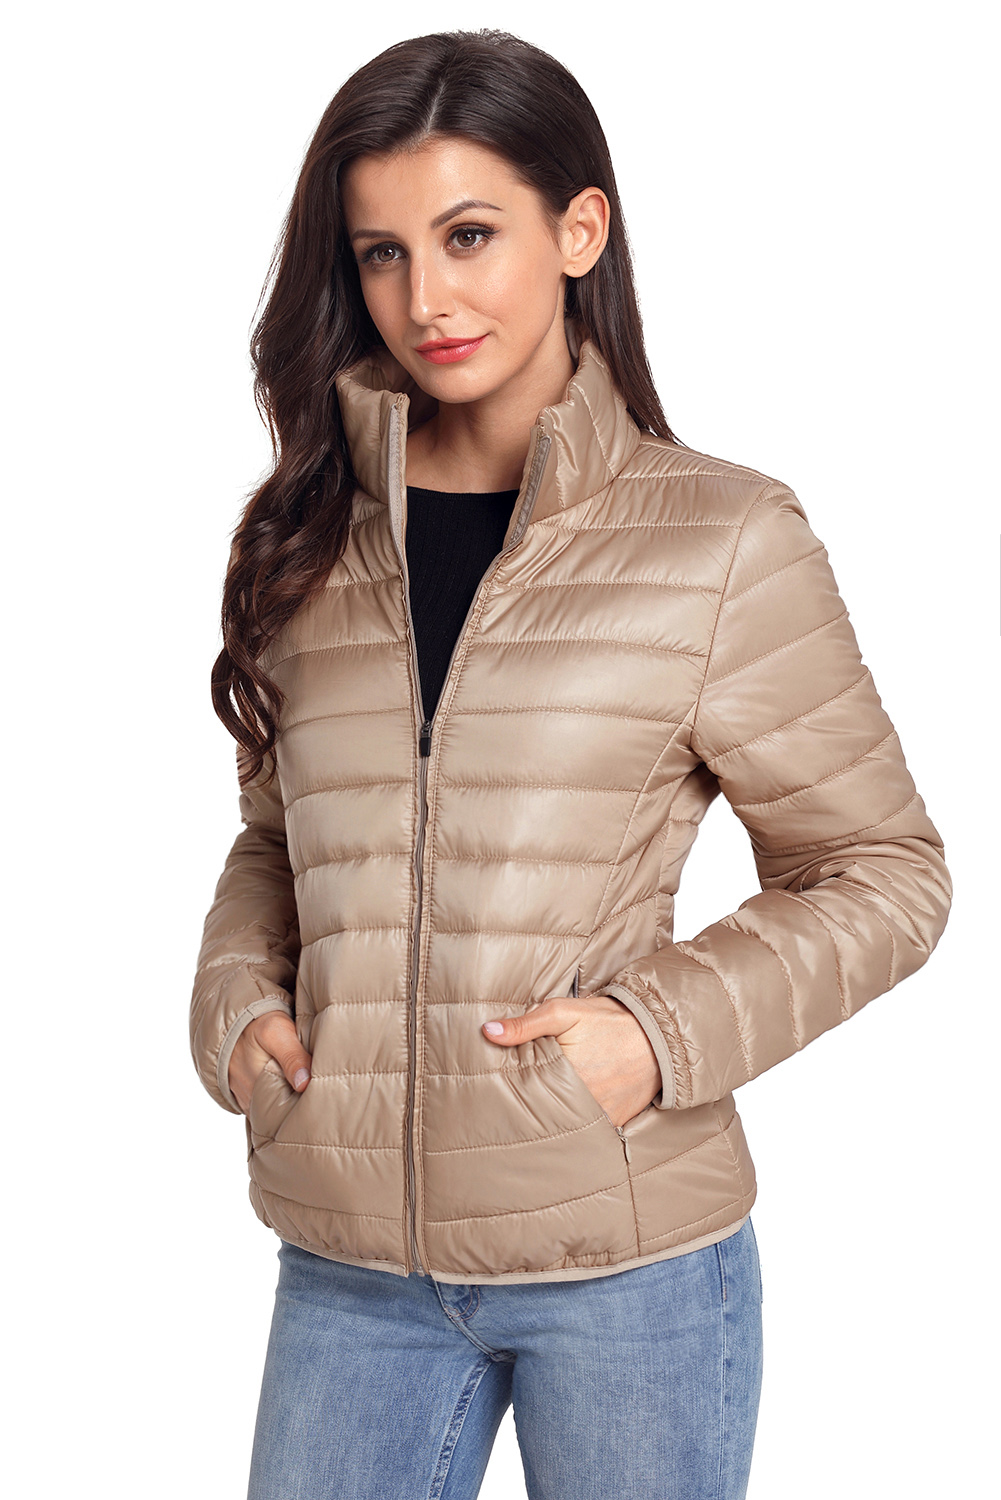 BY85126-18 Khaki High Neck Quilted Cotton Jacket